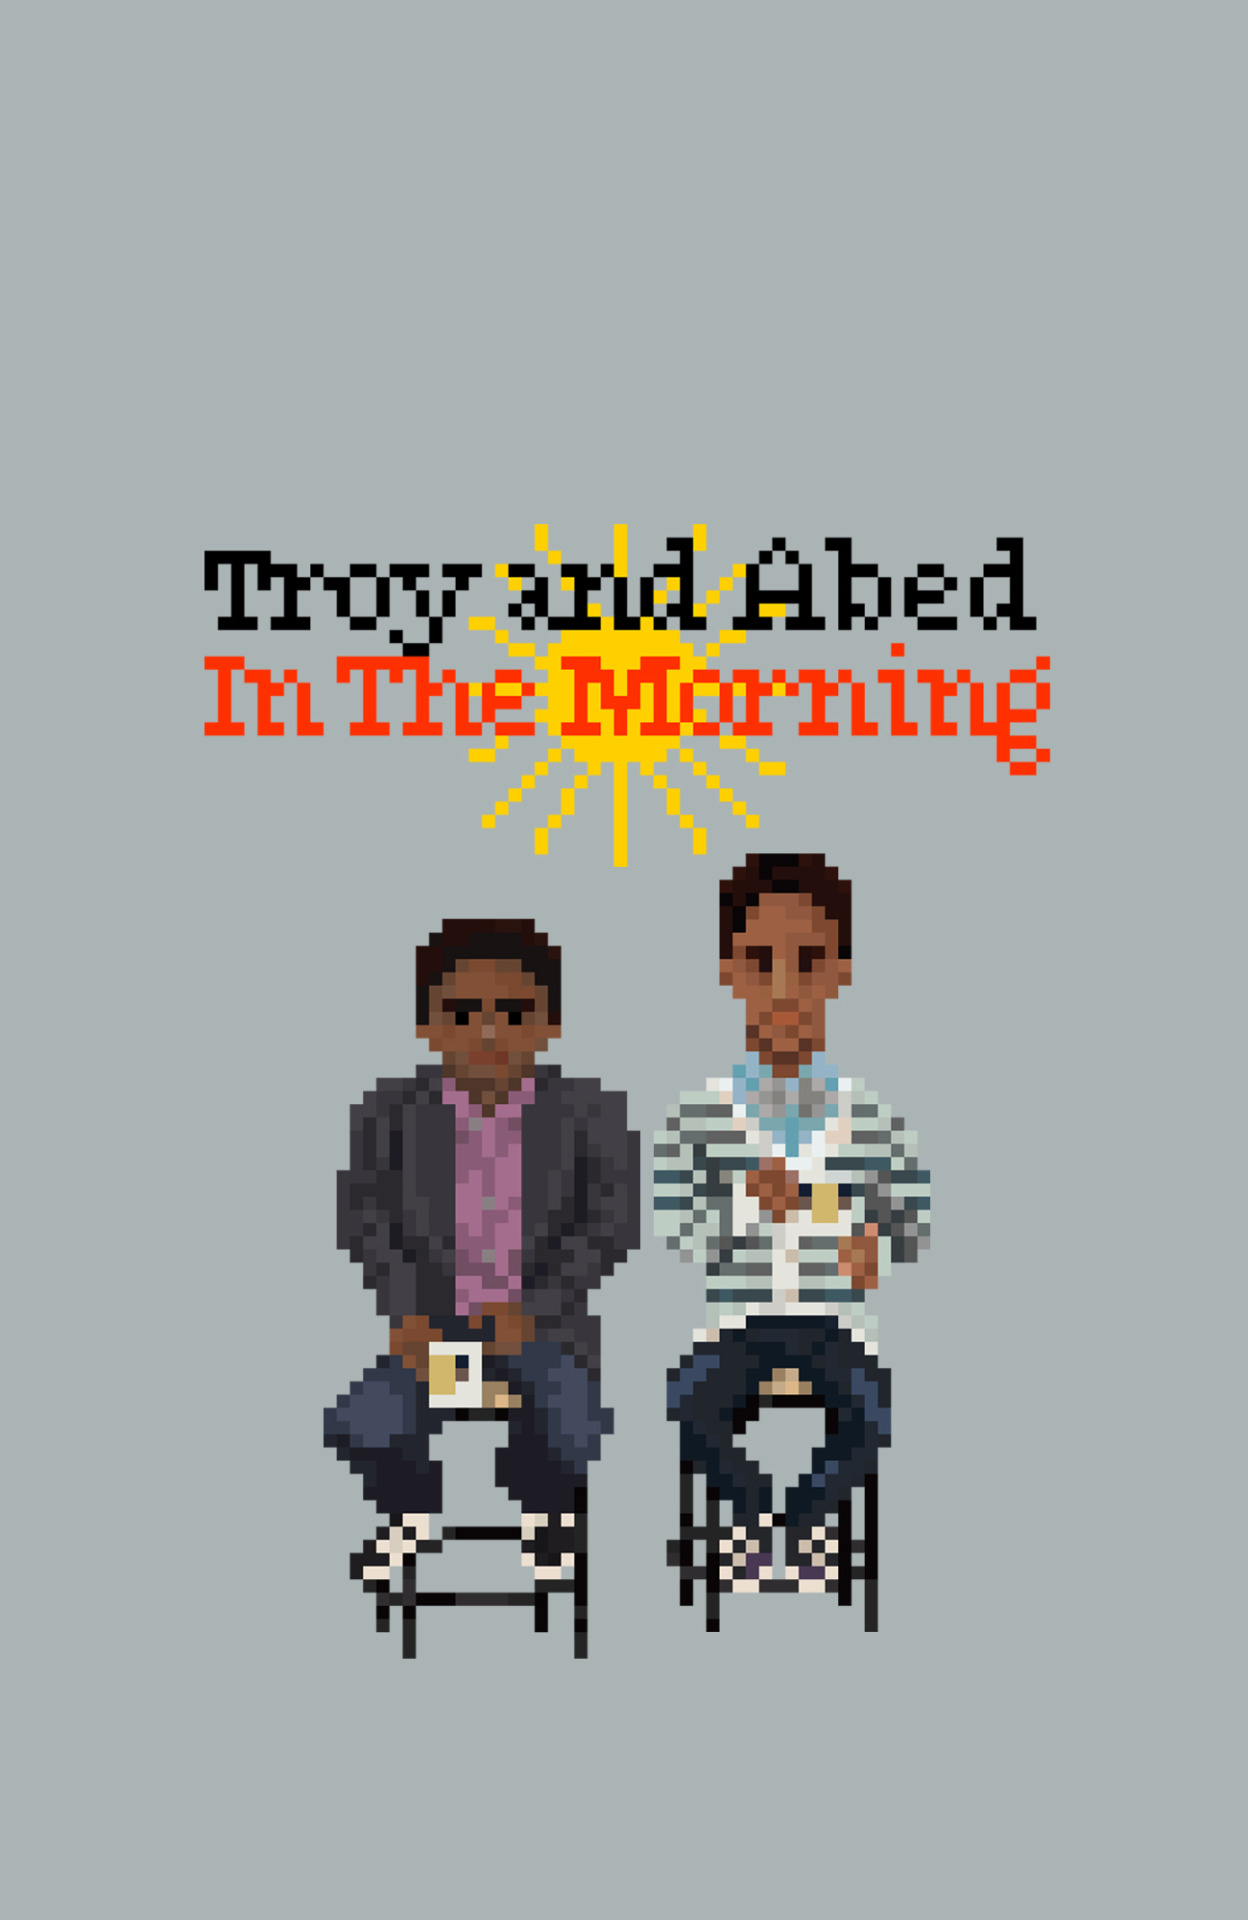 Troy and Abed in the Mooooooorning